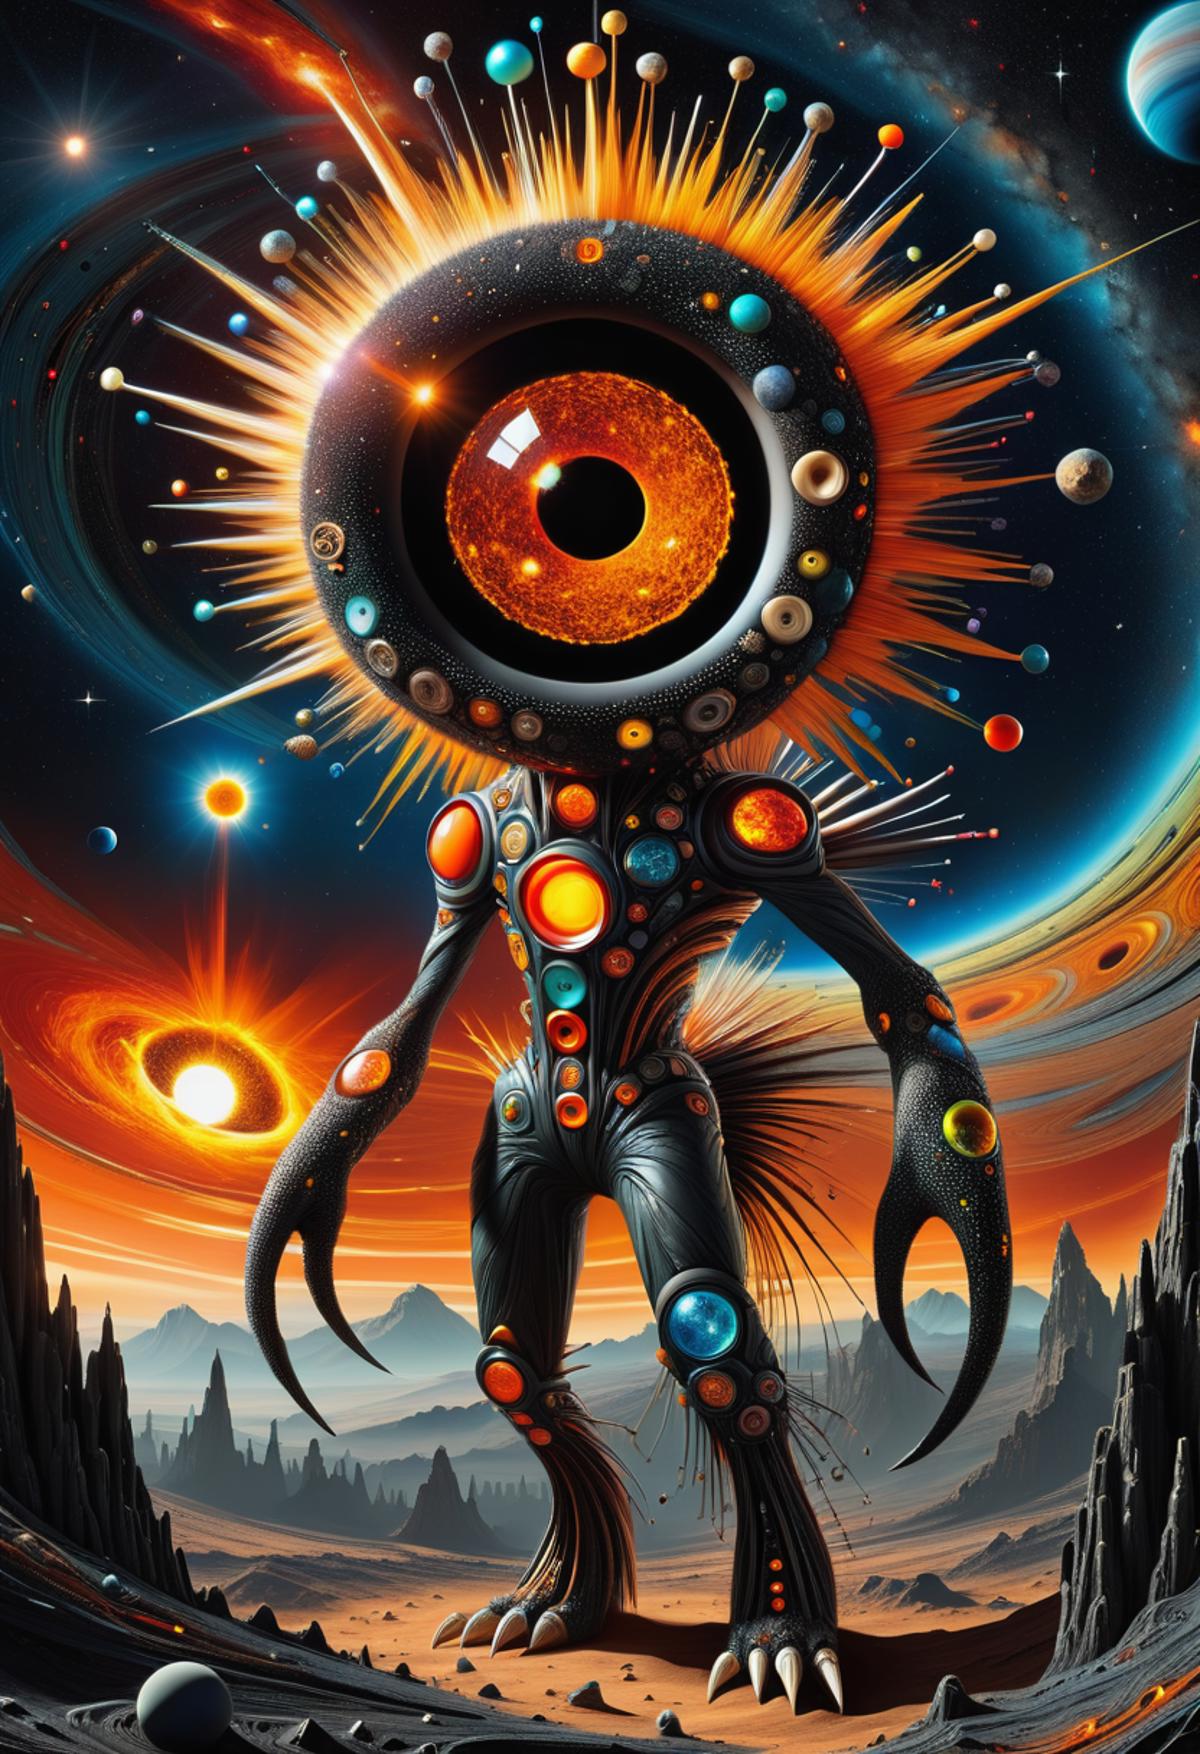 Robotic Alien with a Giant Eye and Numerous Decorations in Space